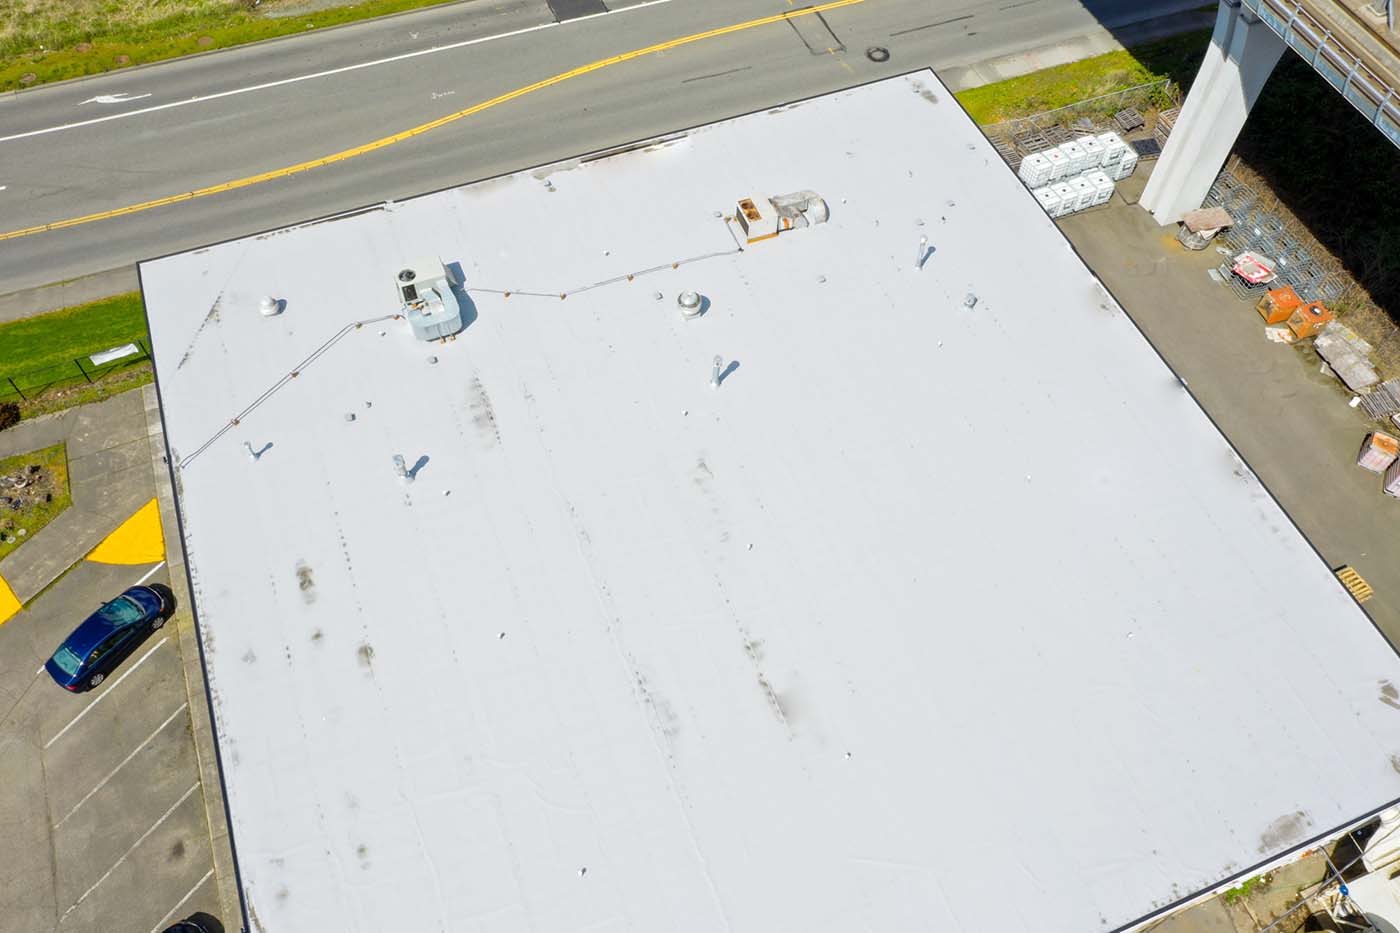 New Flat TPO Roof for Commercial Building in Tukwila, Washington - view of roof details